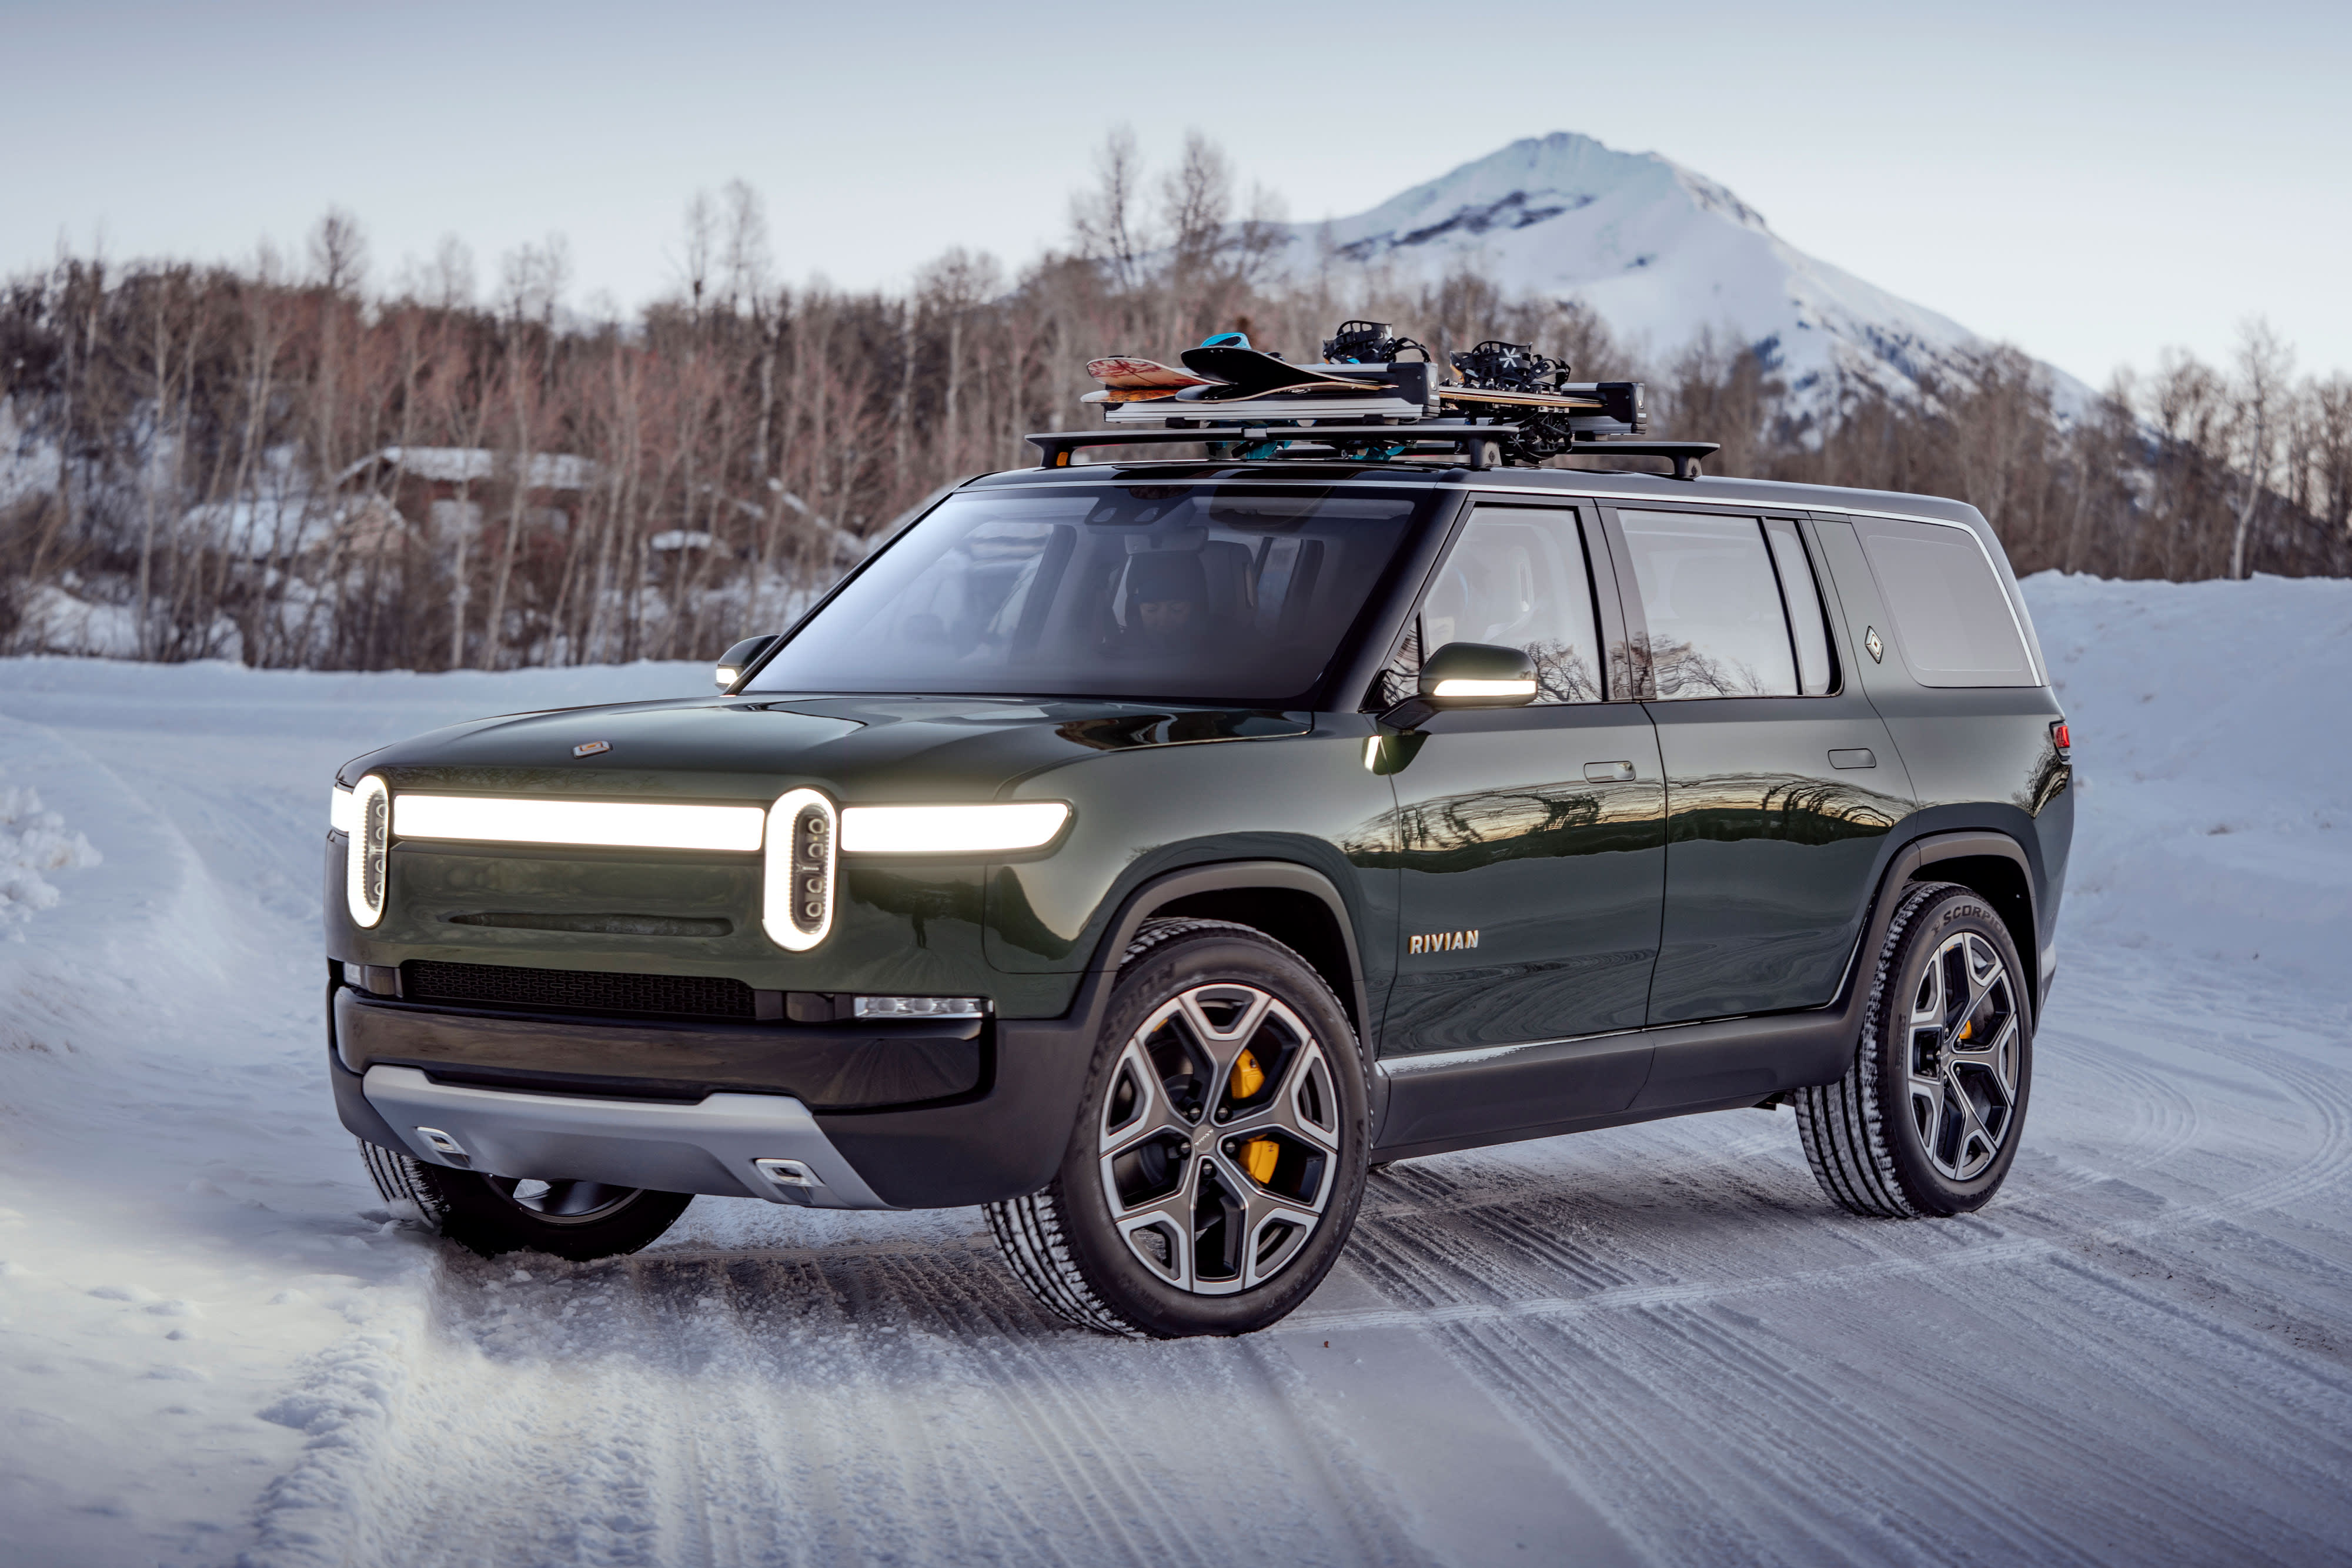 EV start-up Rivian raises $ 2.65 billion in a new round of financing led by T. Rowe Price